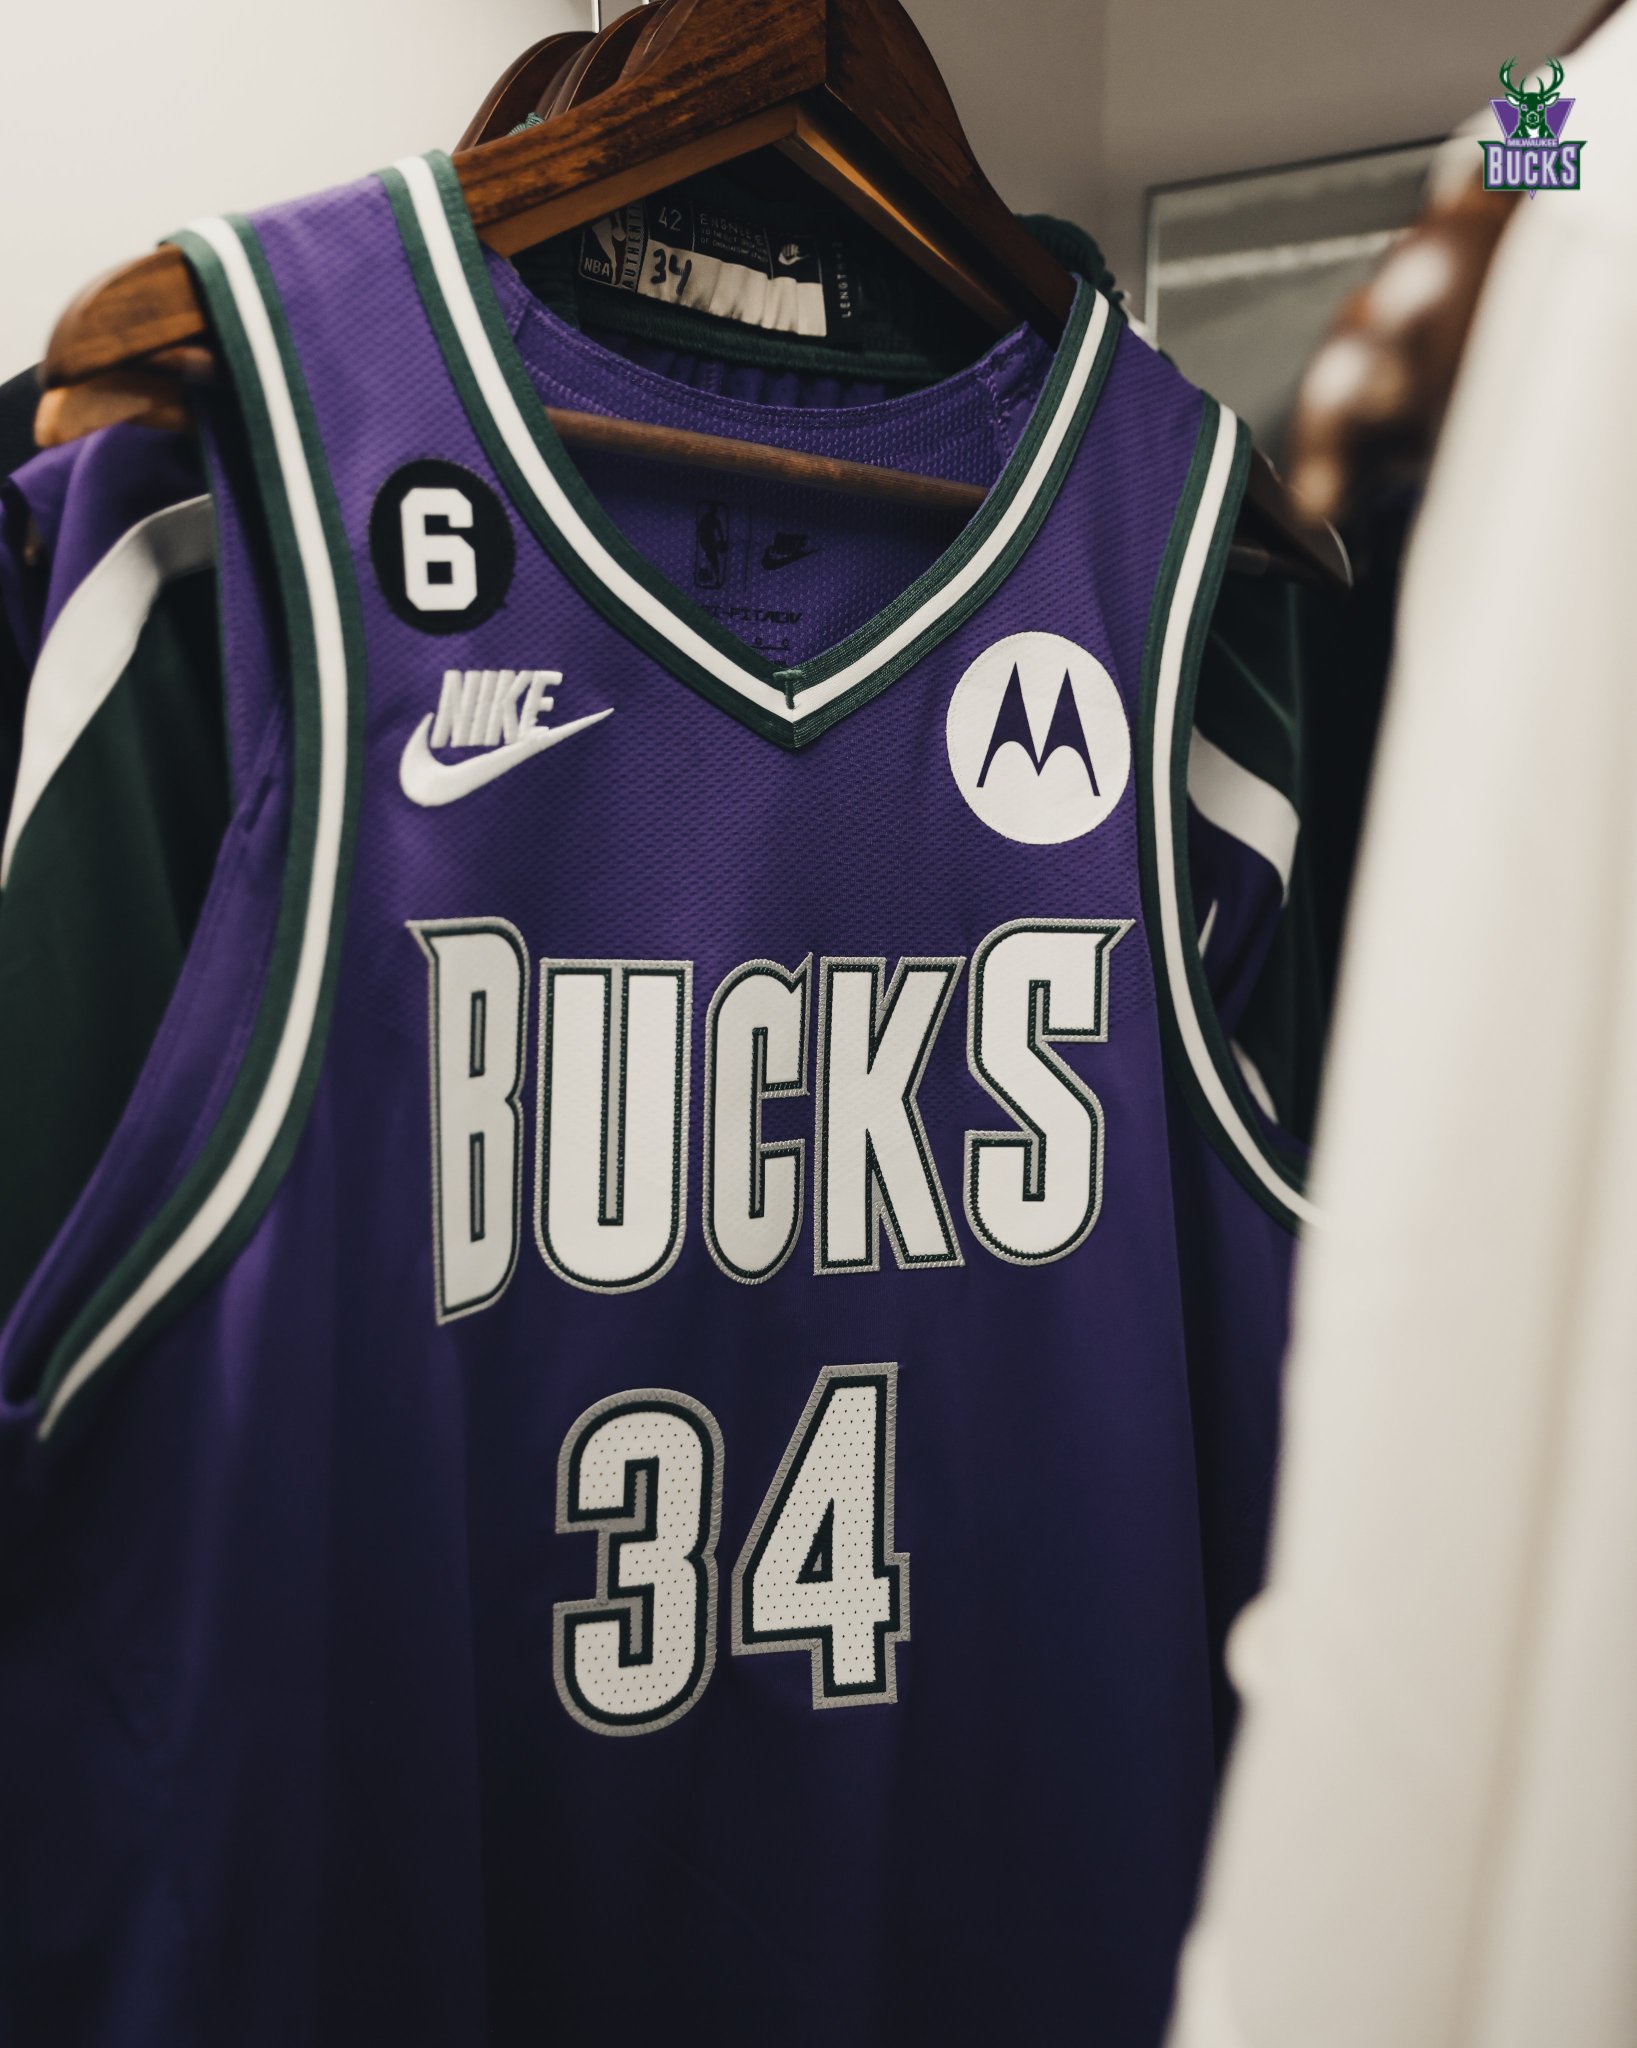 Milwaukee Bucks on X: Calling all Bucks fans. Get your jerseys ready for  December 14th to celebrate #NBAJerseyDay in style. What jersey are you  rocking with?  / X